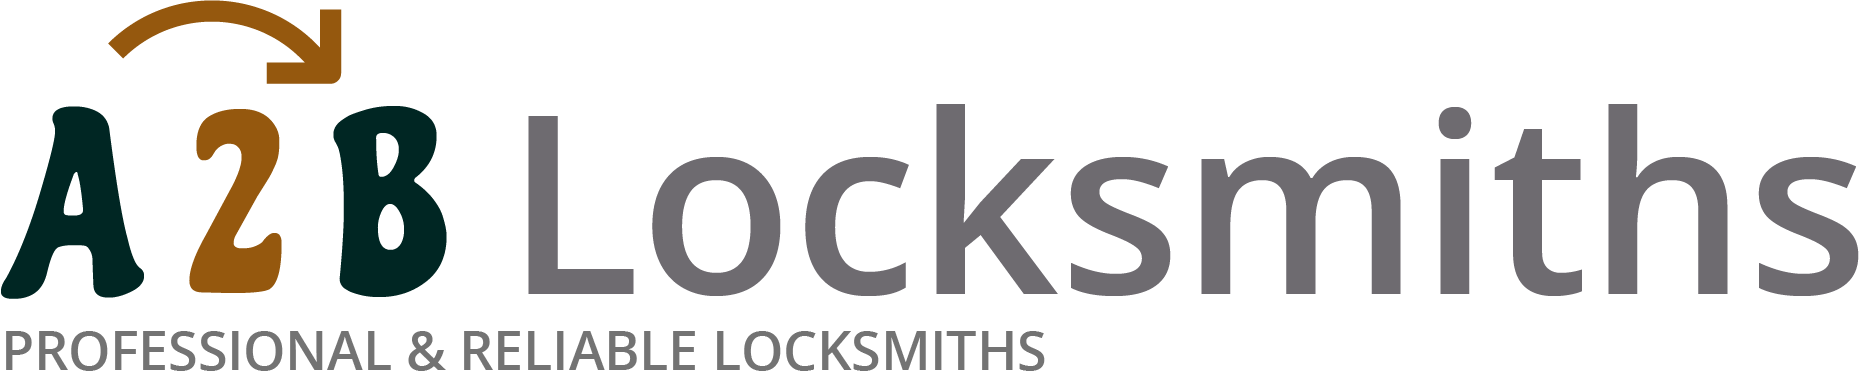 If you are locked out of house in Bromsgrove, our 24/7 local emergency locksmith services can help you.